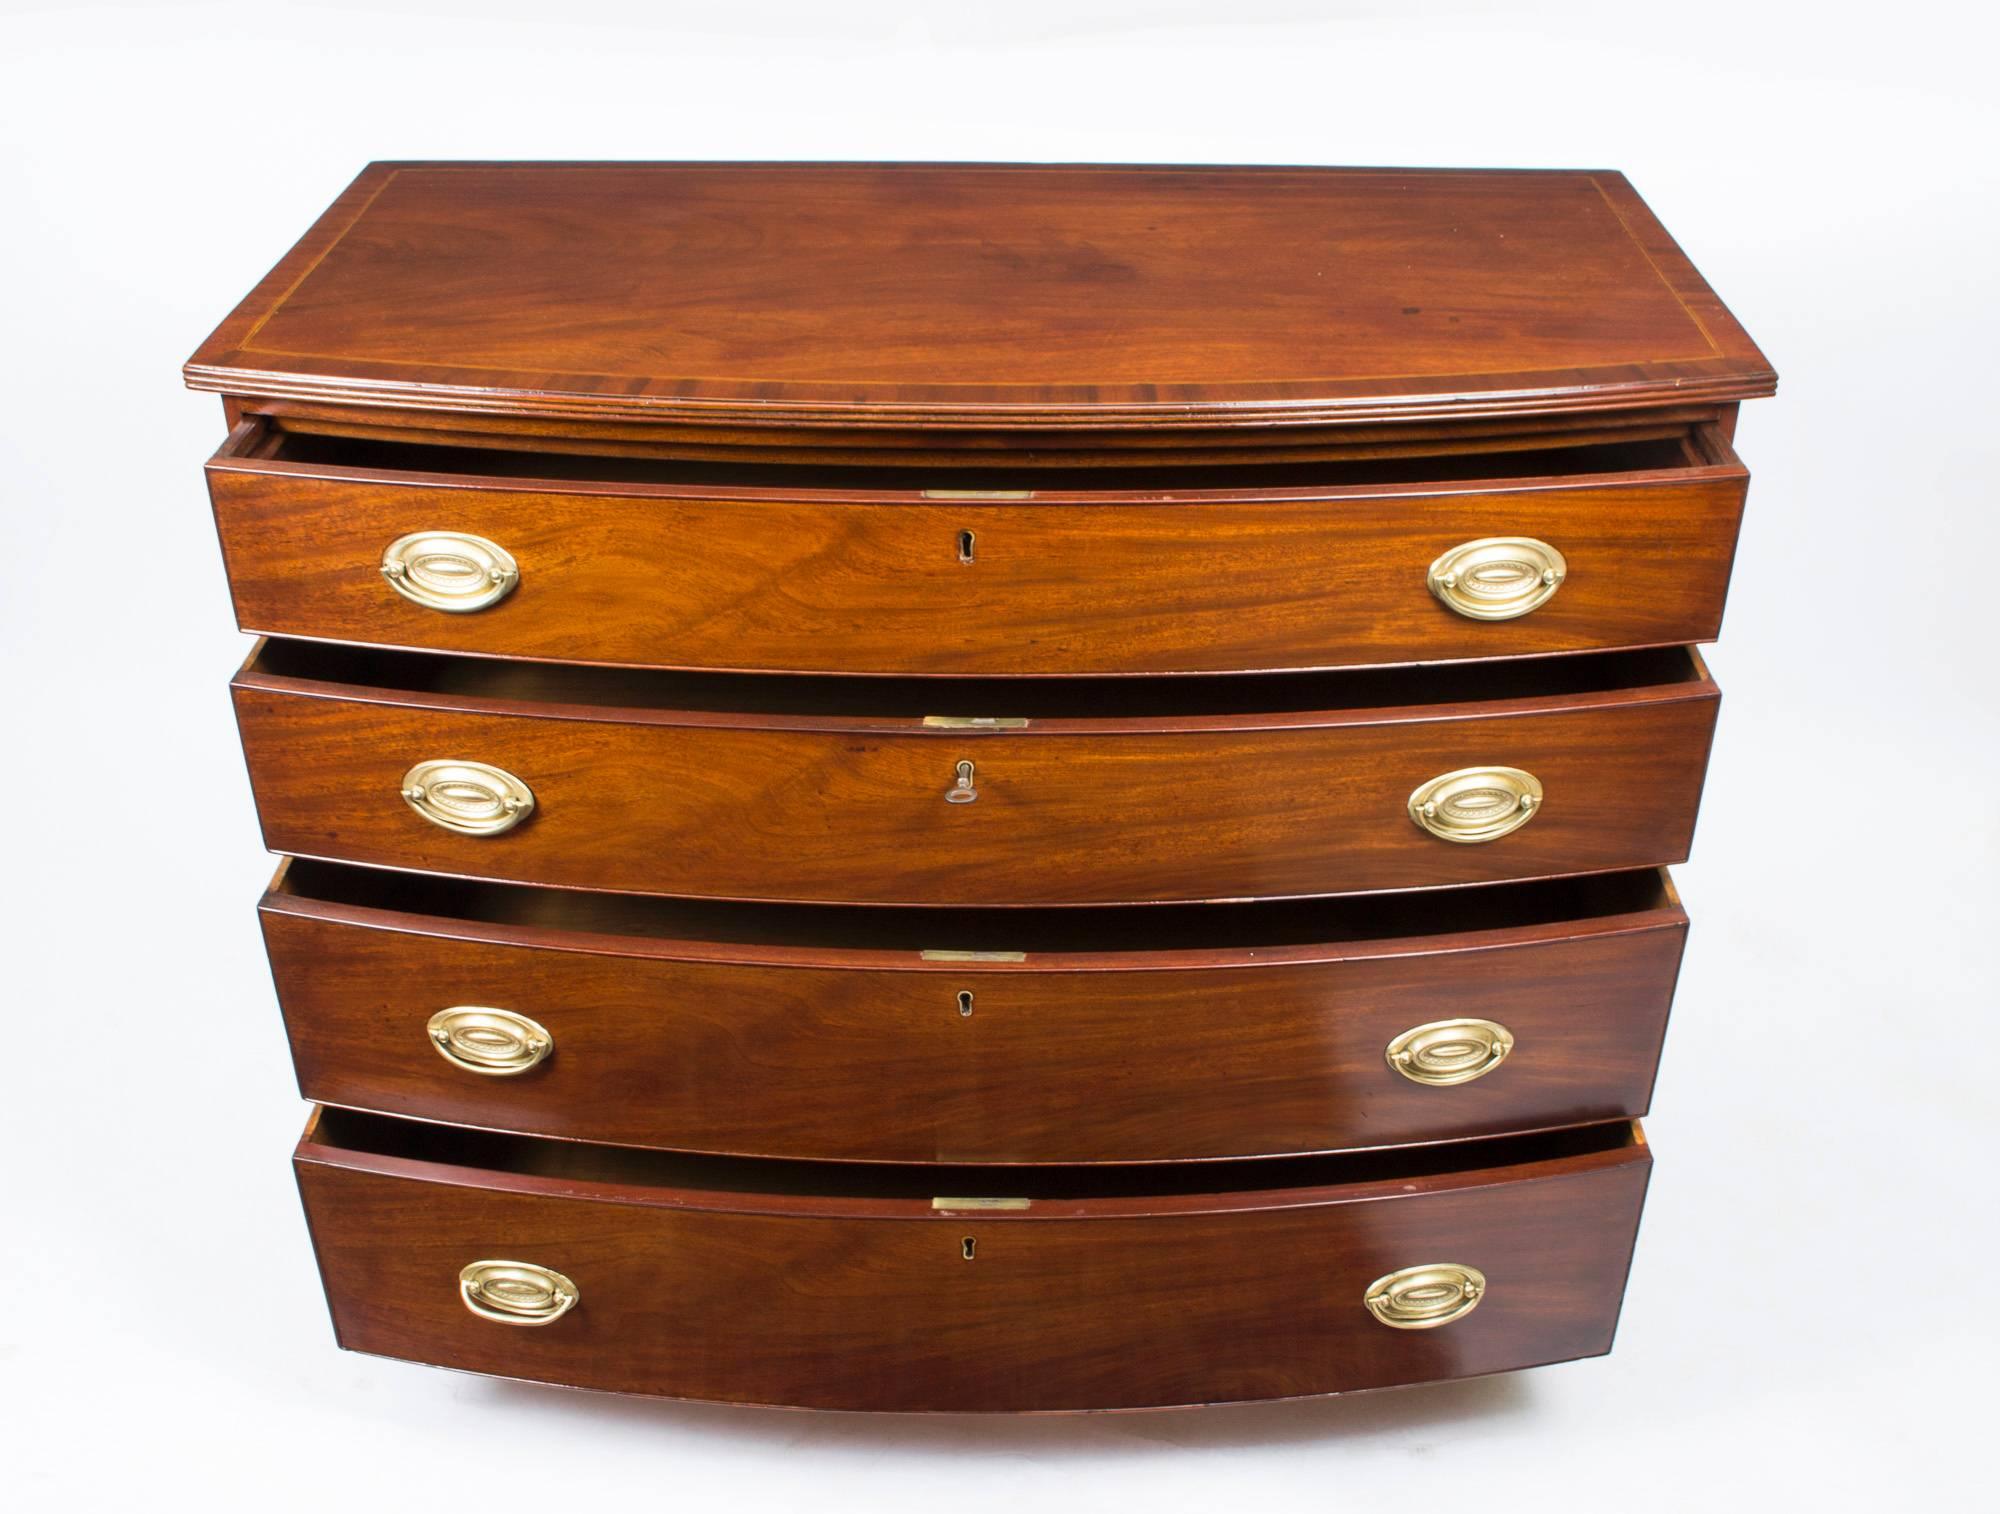 This is beautifully crafted antique George III mahogany bow fronted chest of drawers, circa 1790 in date. 

This antique chest is made from the finest quality flame mahogany, you can see the beautiful grain of the wood.

There are four capacious